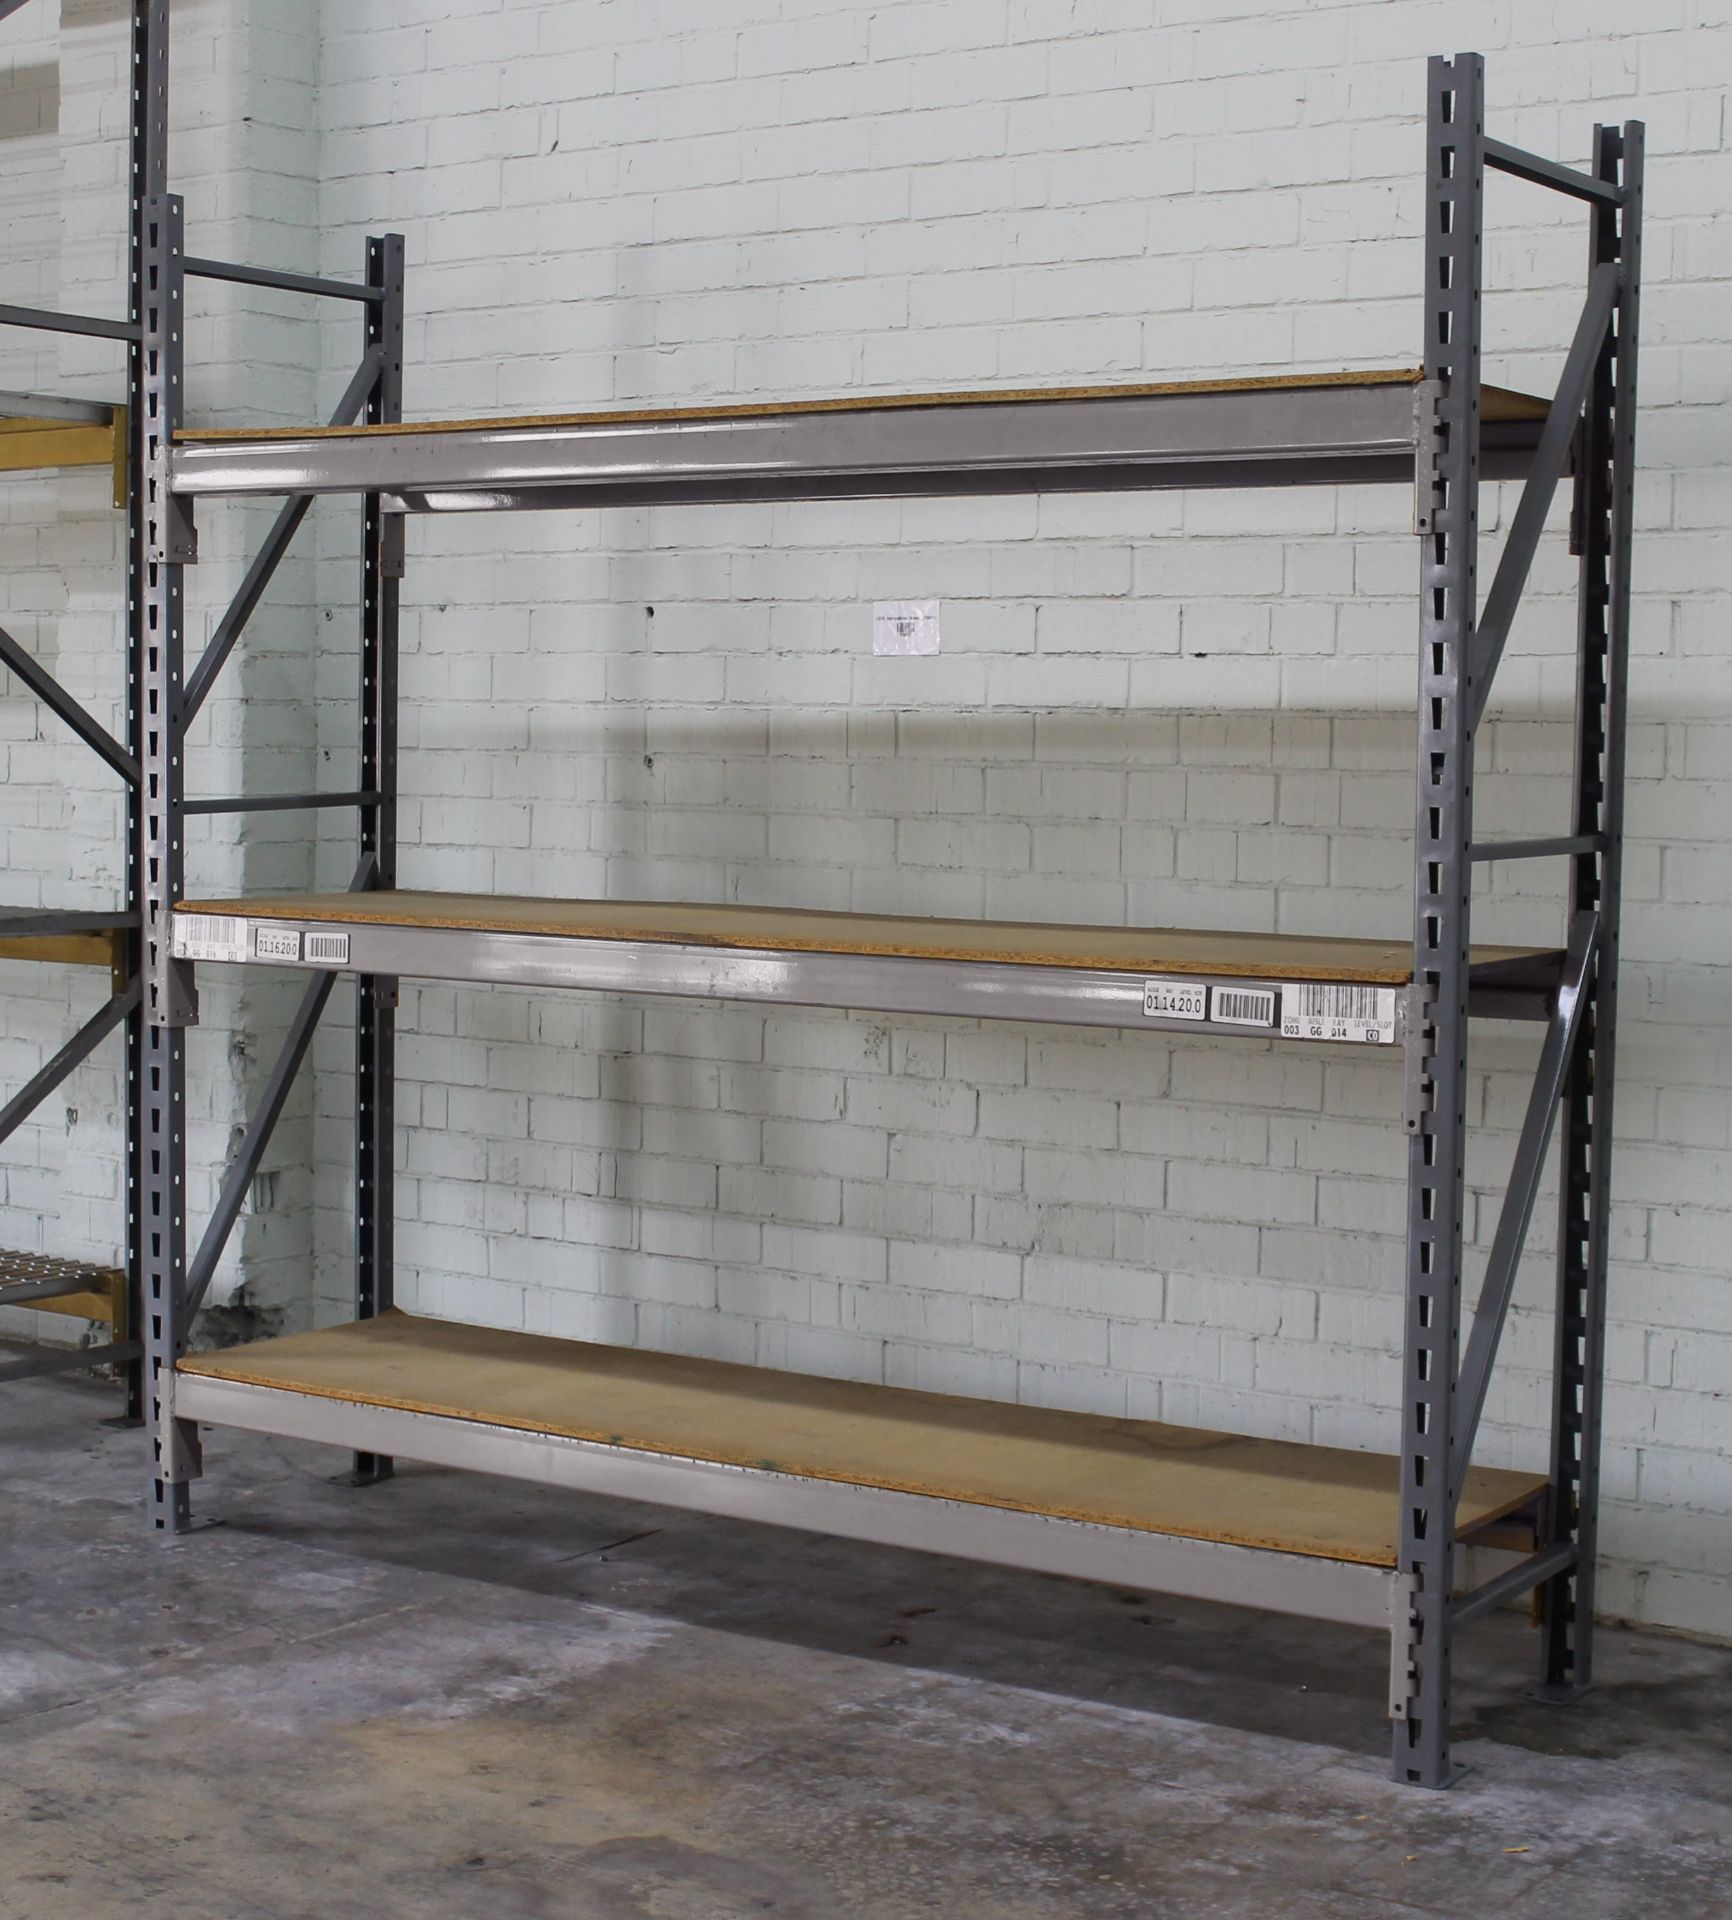 NEW 20 SECTIONS OF 96"H X 24"D X 96"L STOCK ROOM PALLET RACK SHELVING